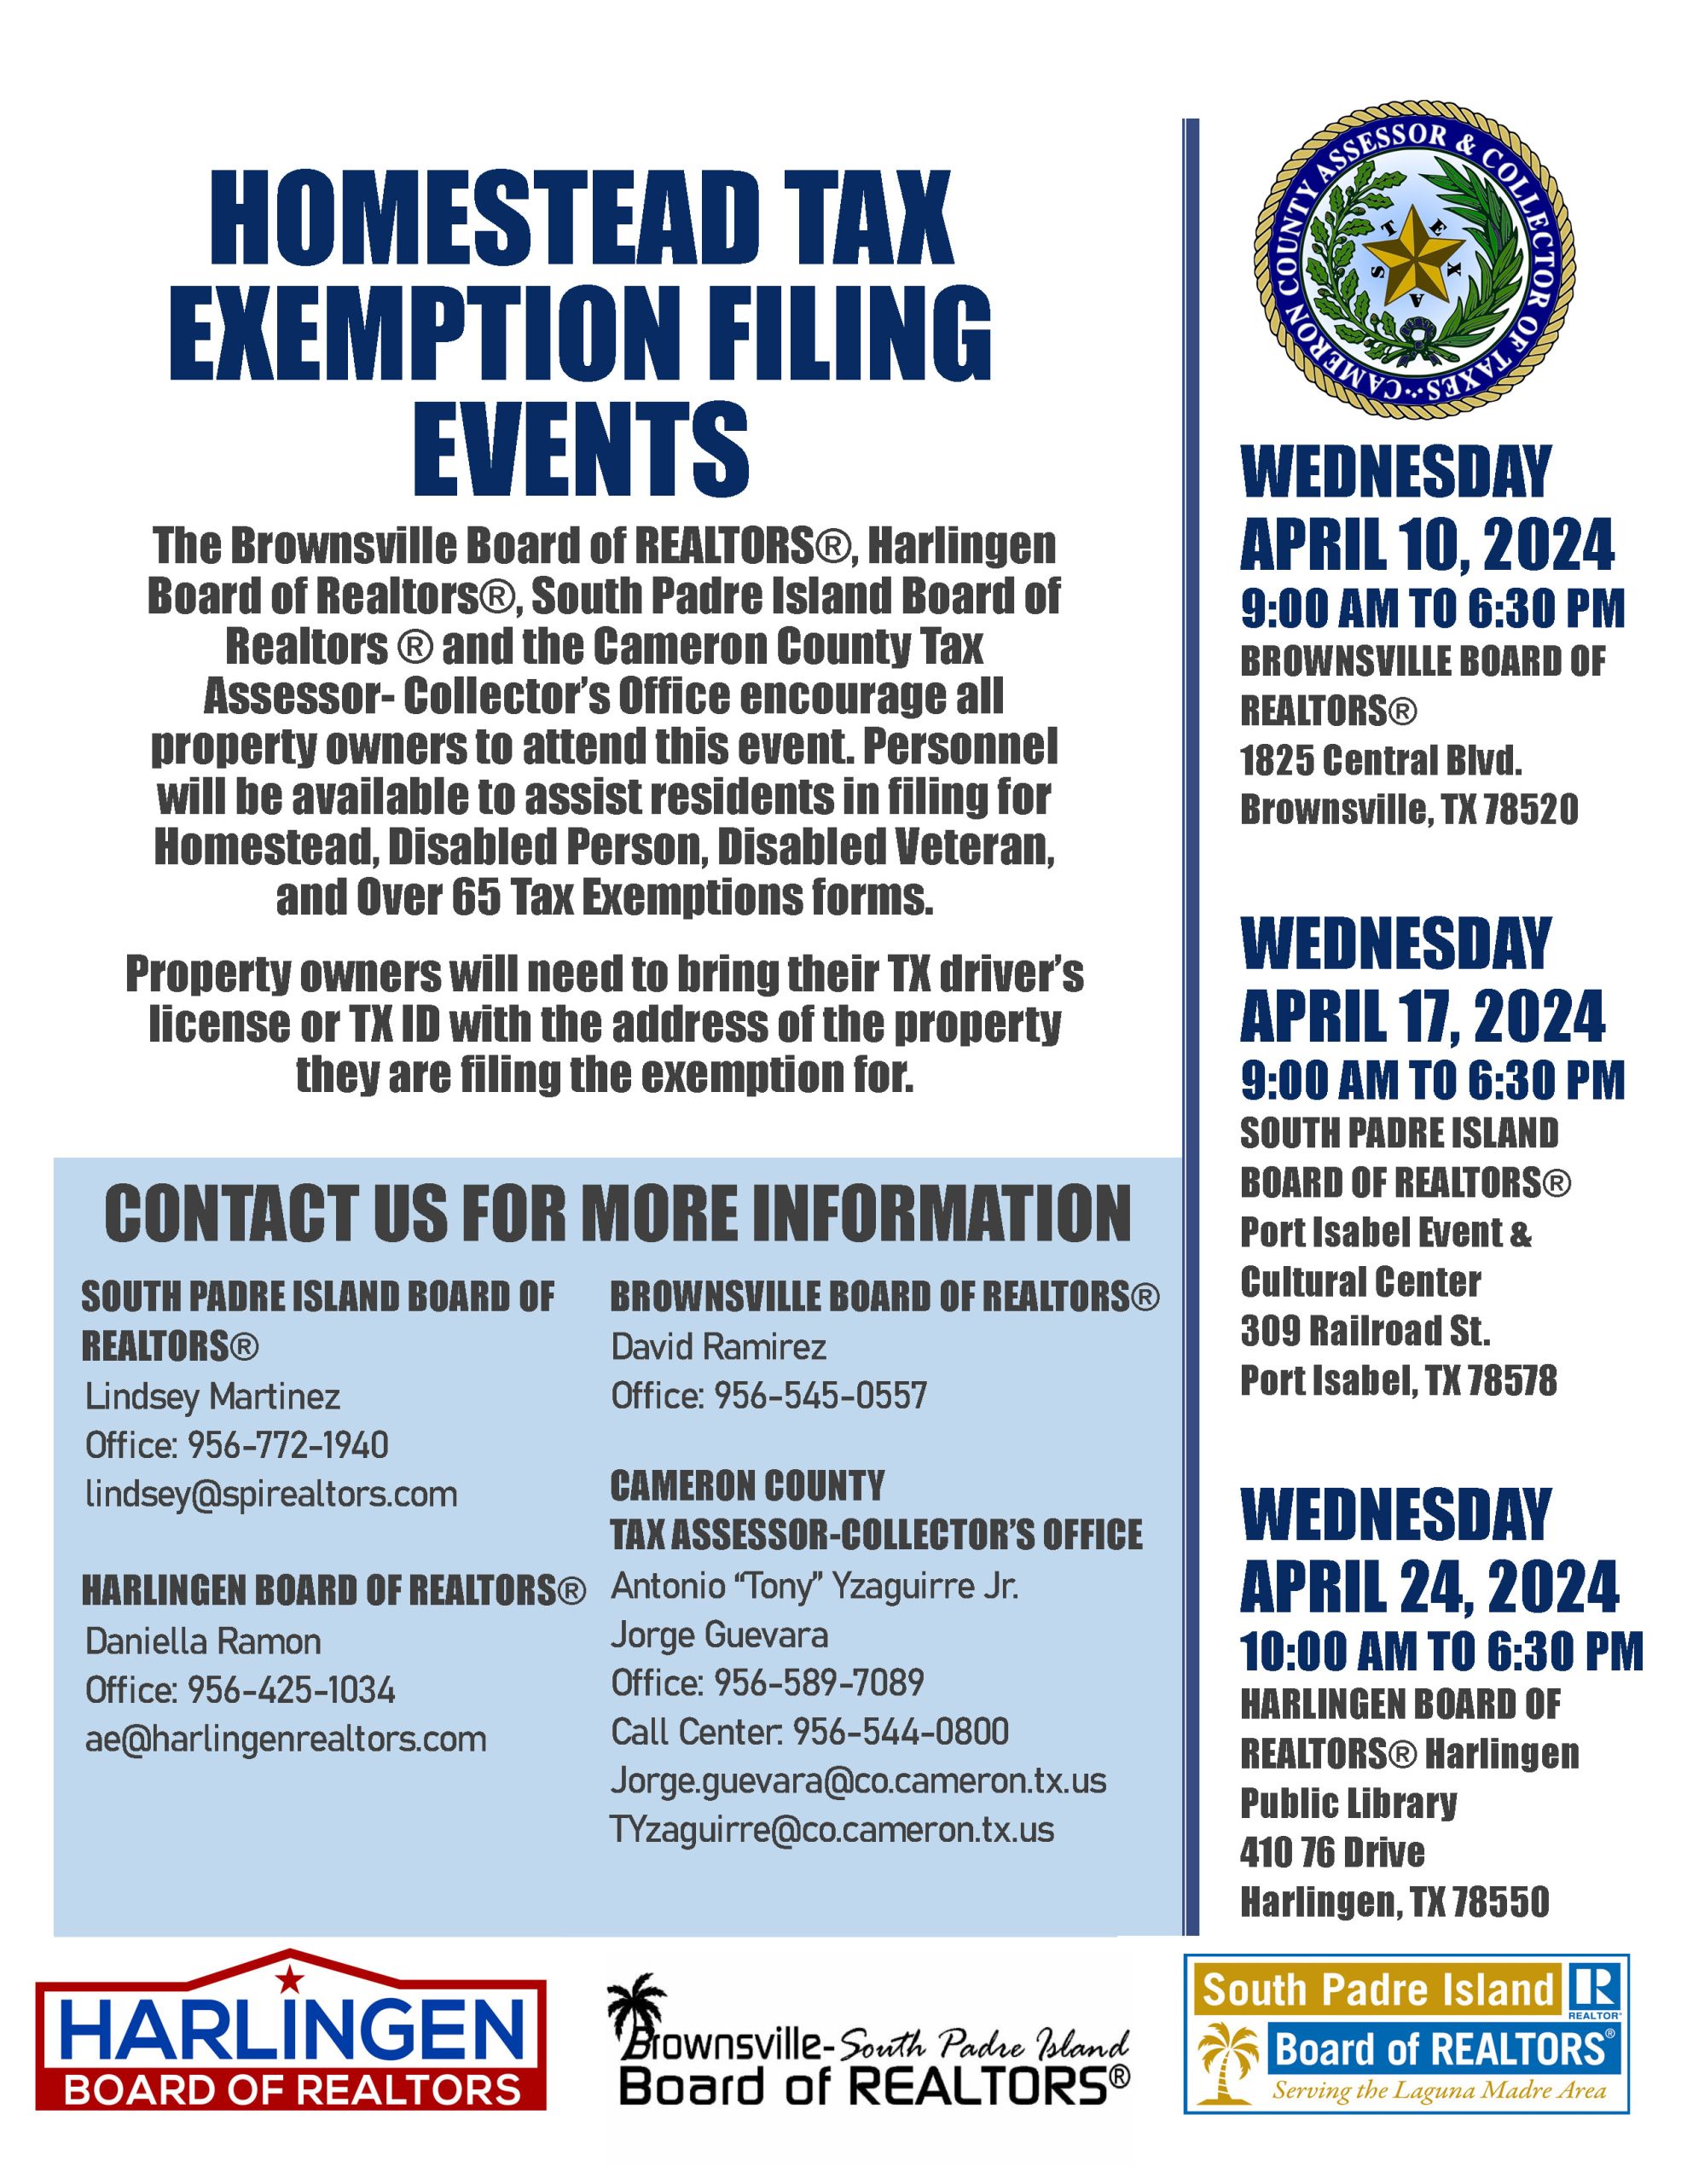 HOMESTEAD TAX EXEMPTION FILING EVENT Flyer Scaled